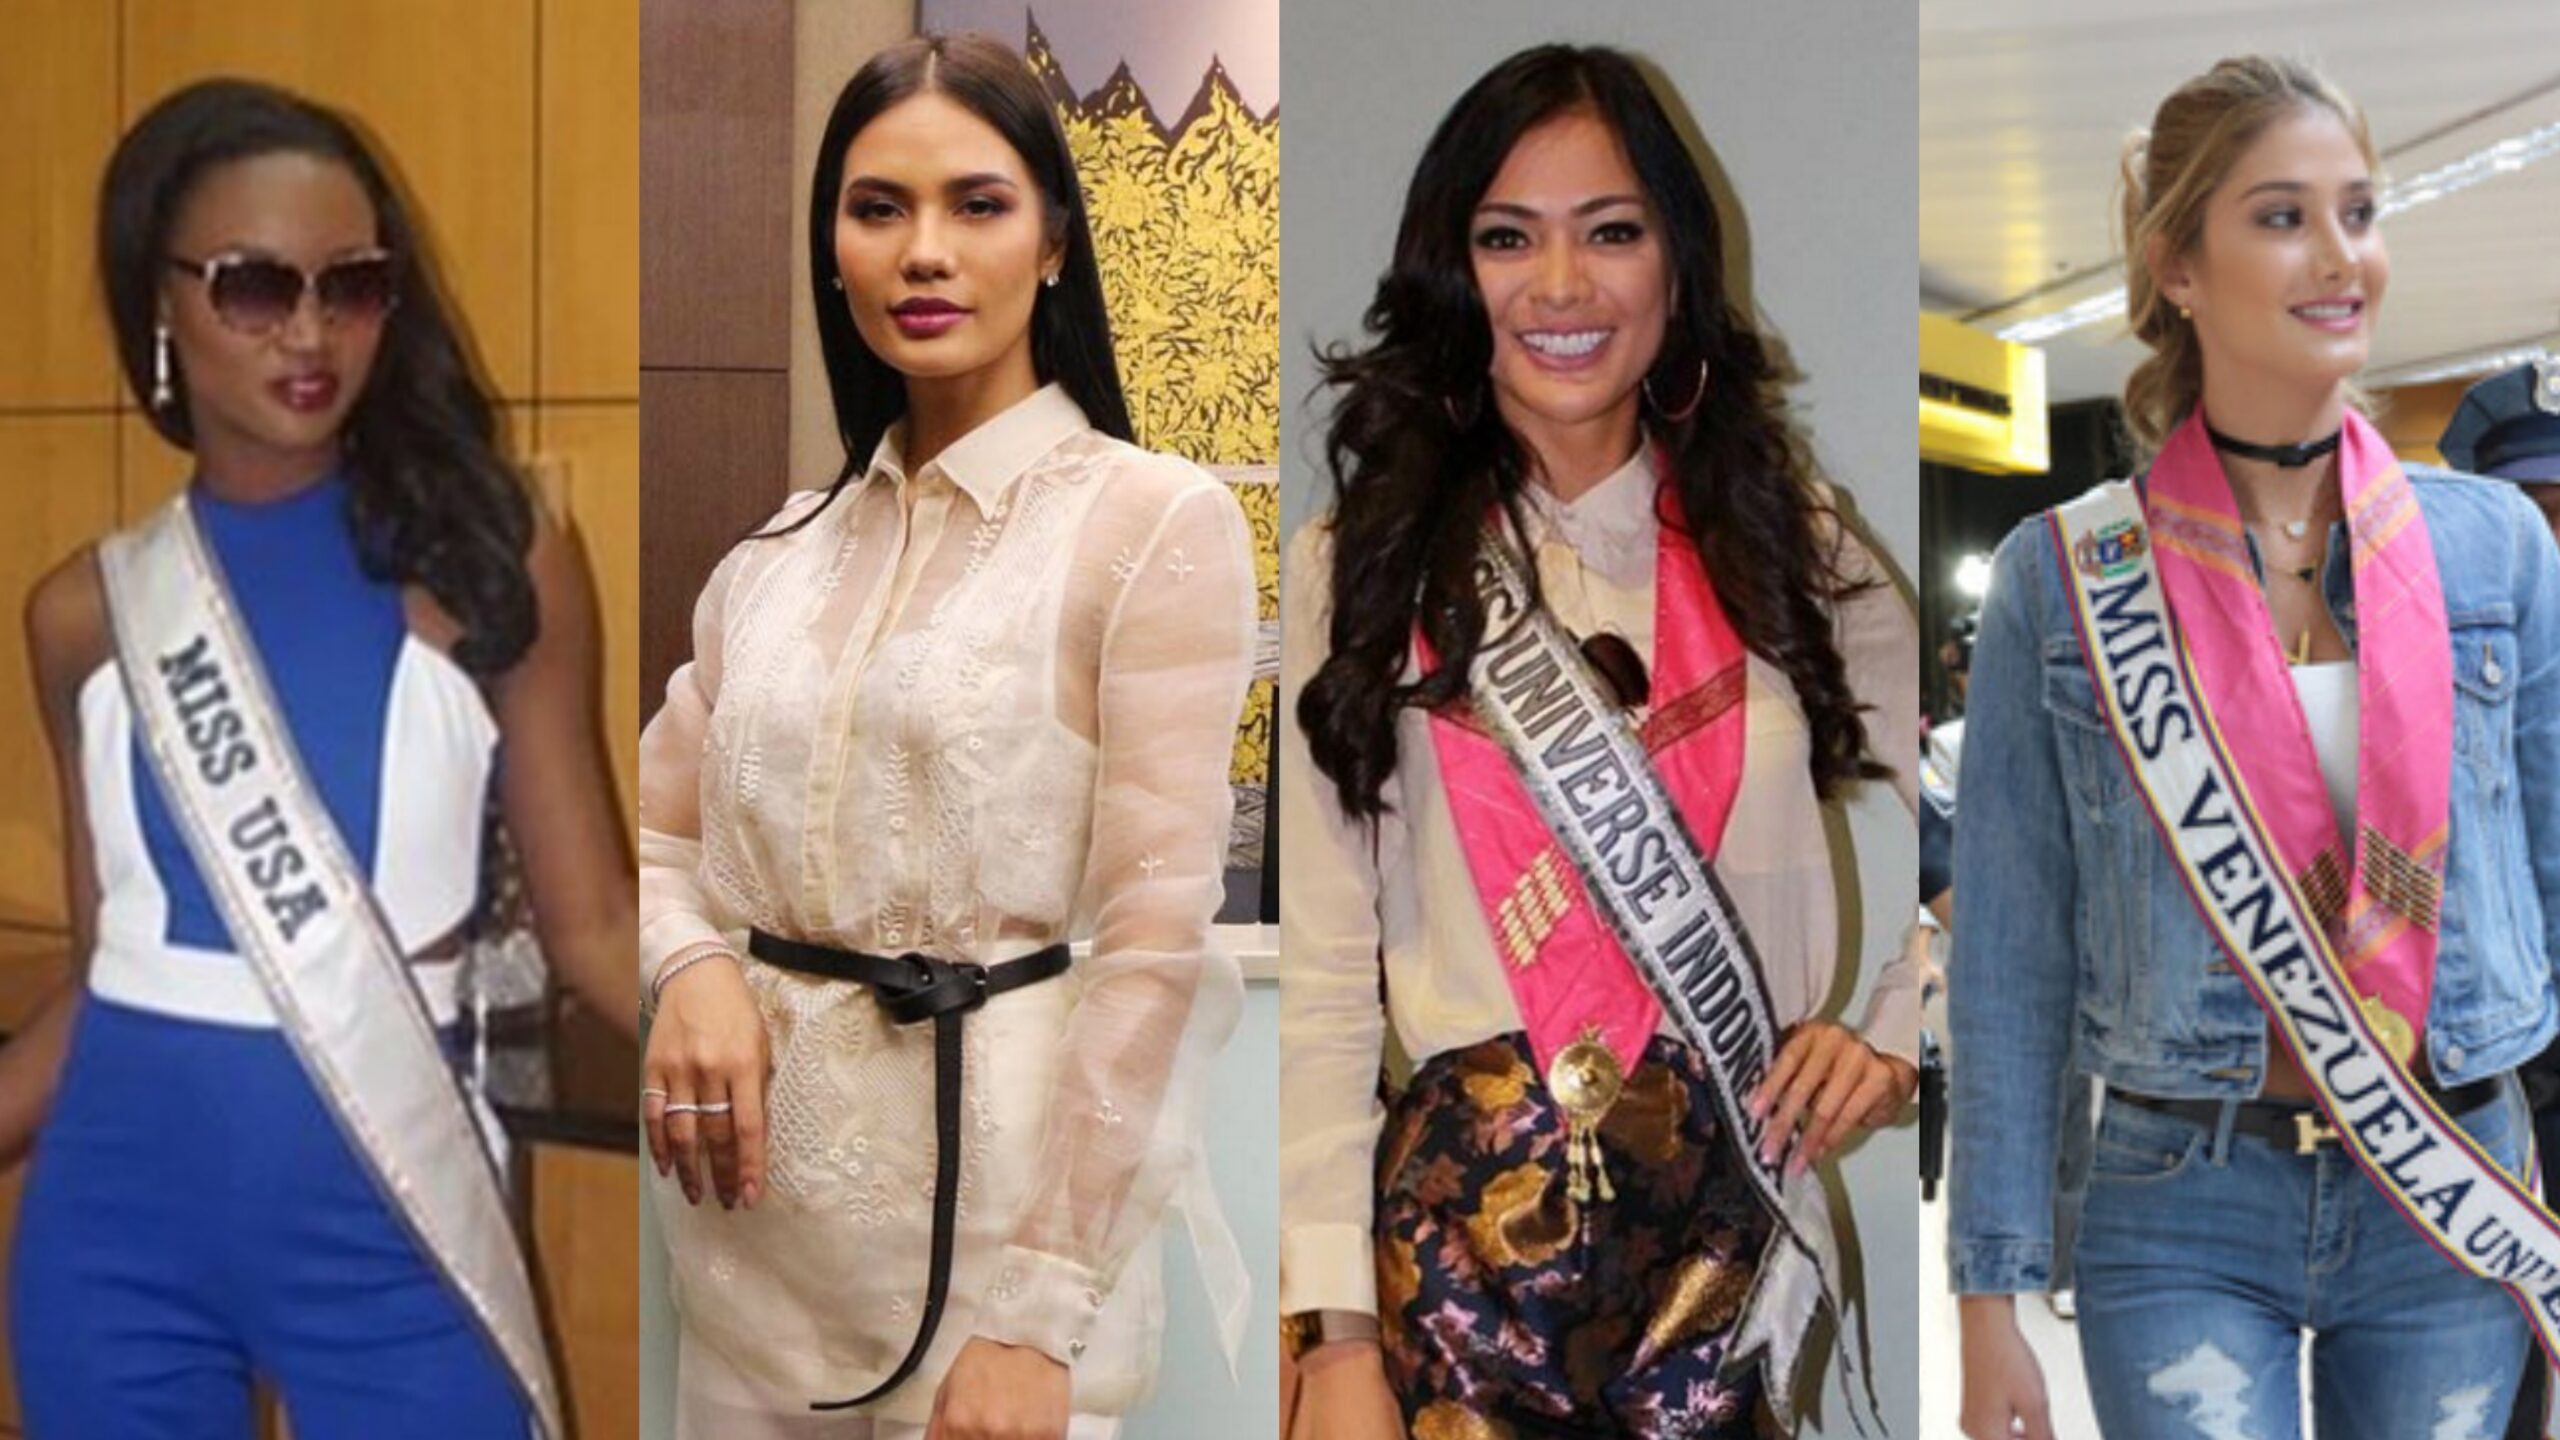 IN PHOTOS: Miss Universe candidates arrive in Manila